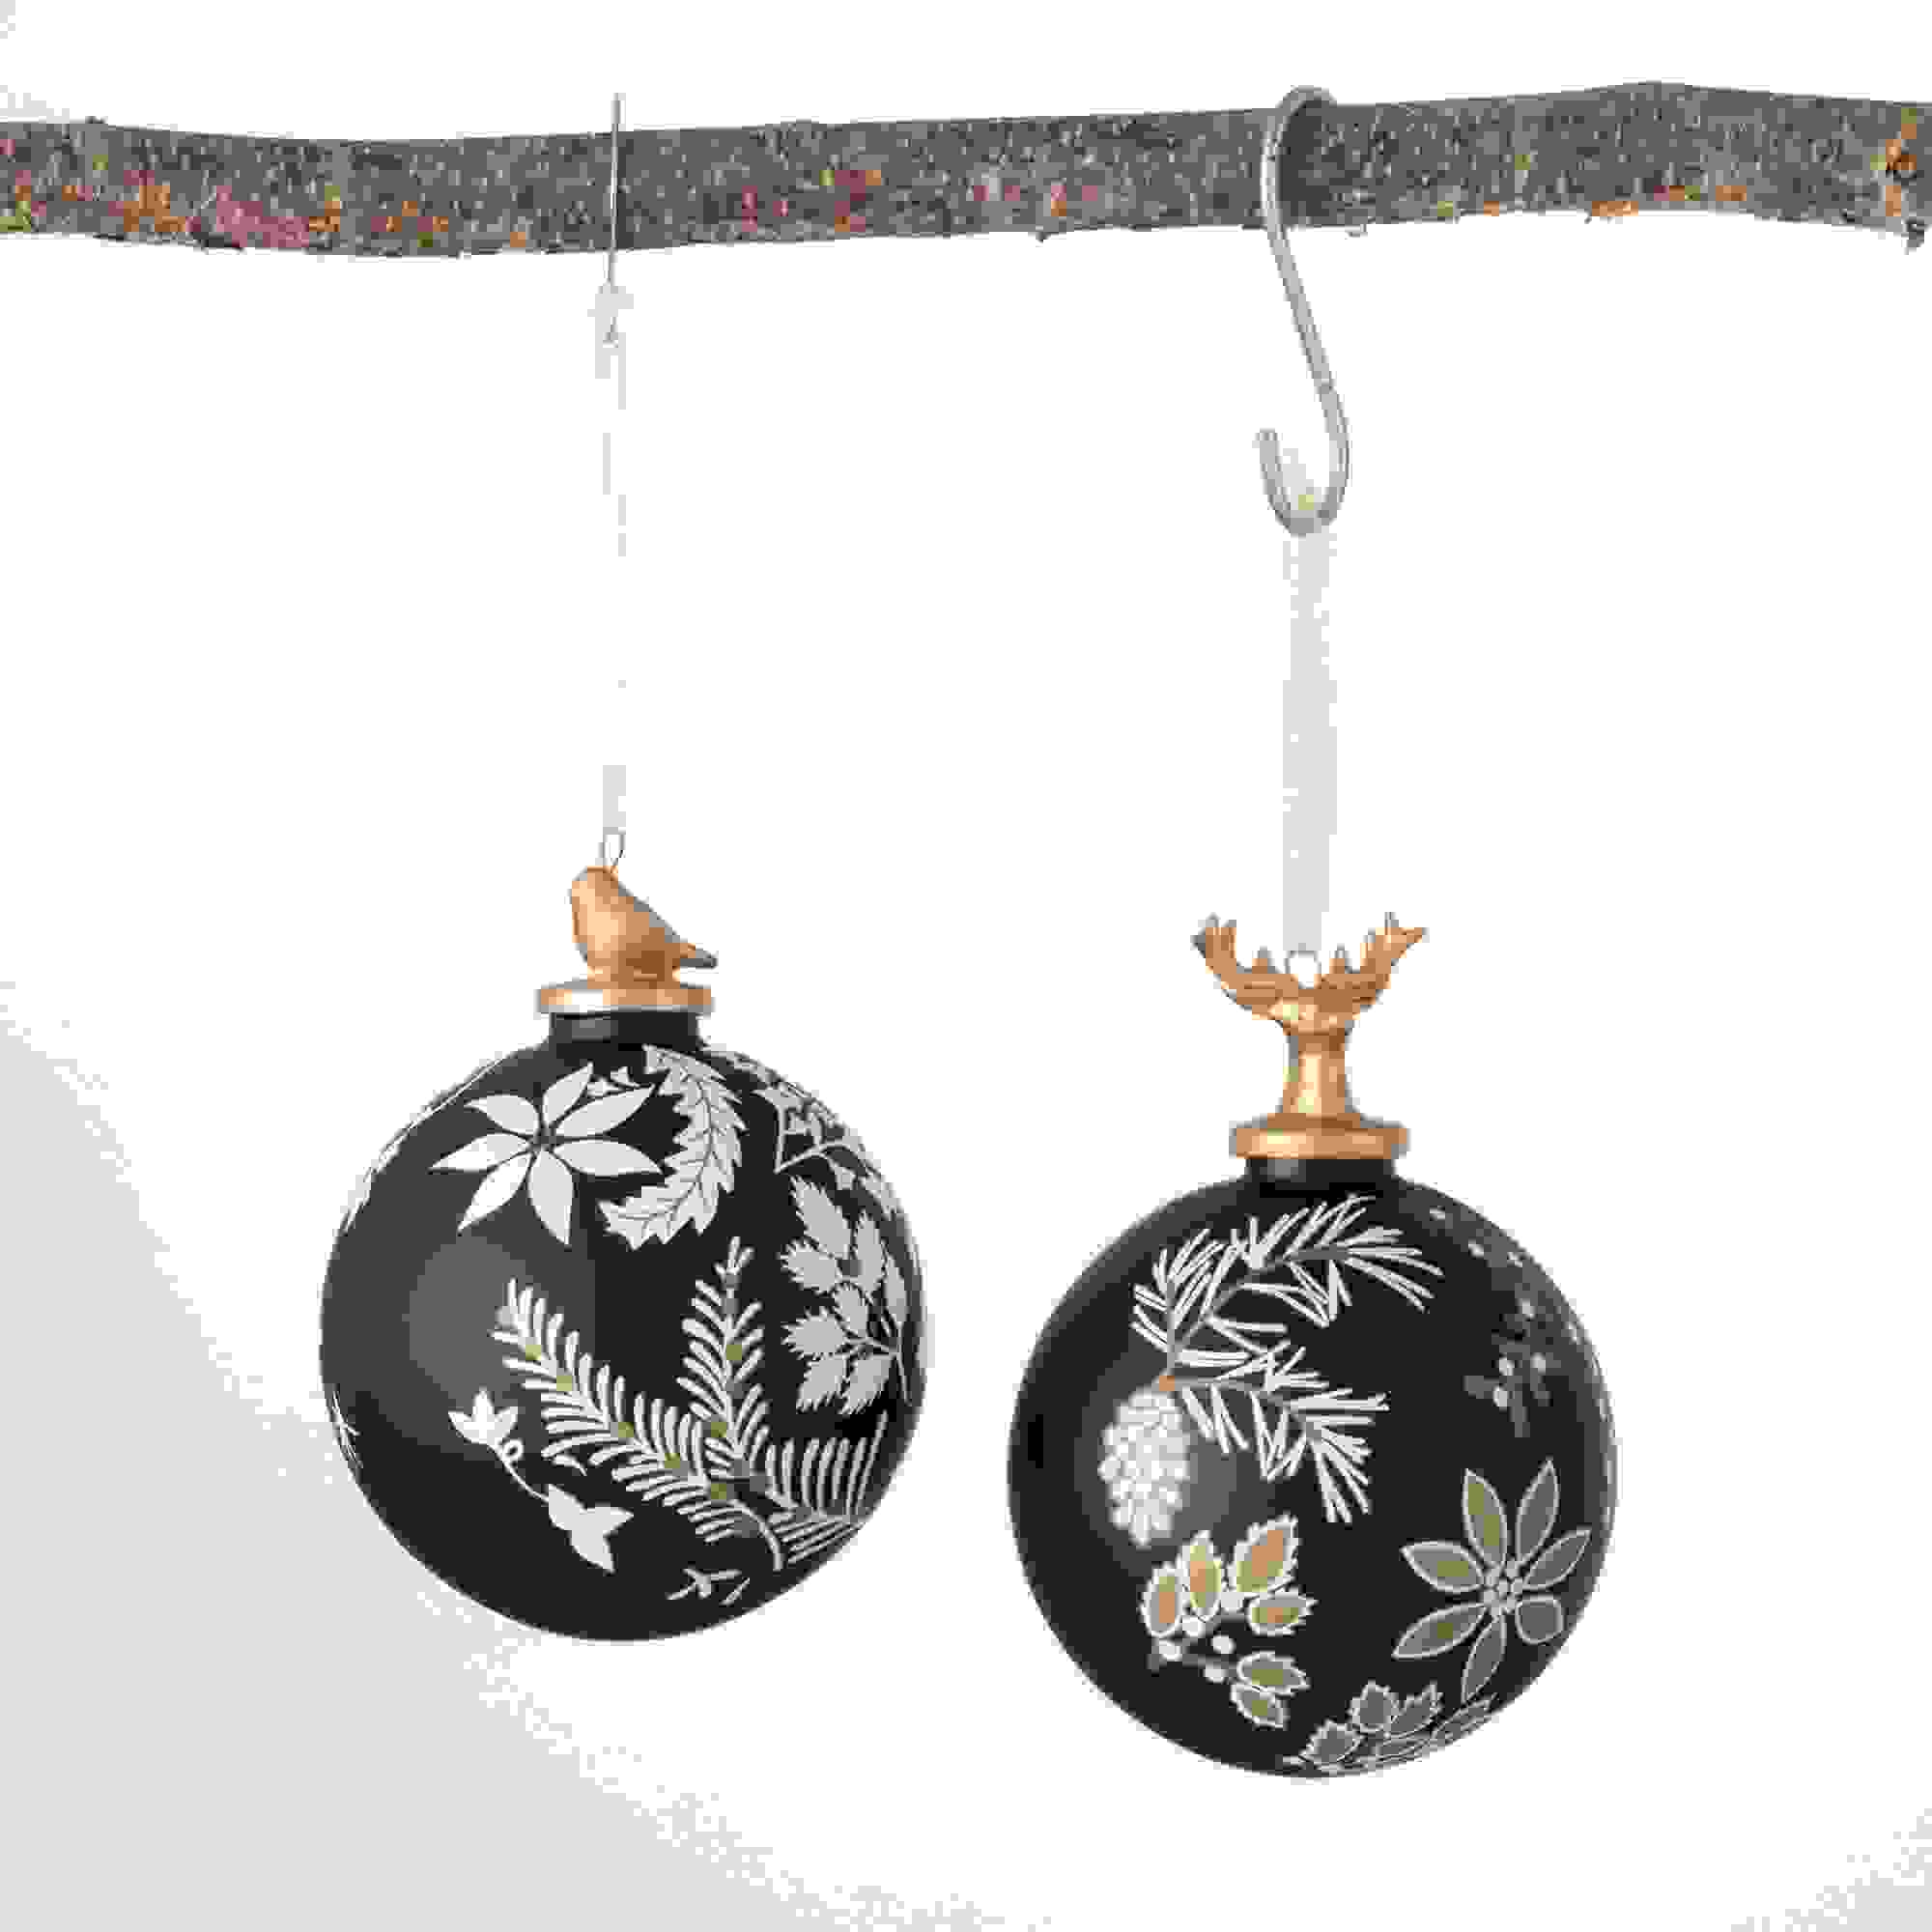 PATTERNED WOODLAND ORNAMENTS